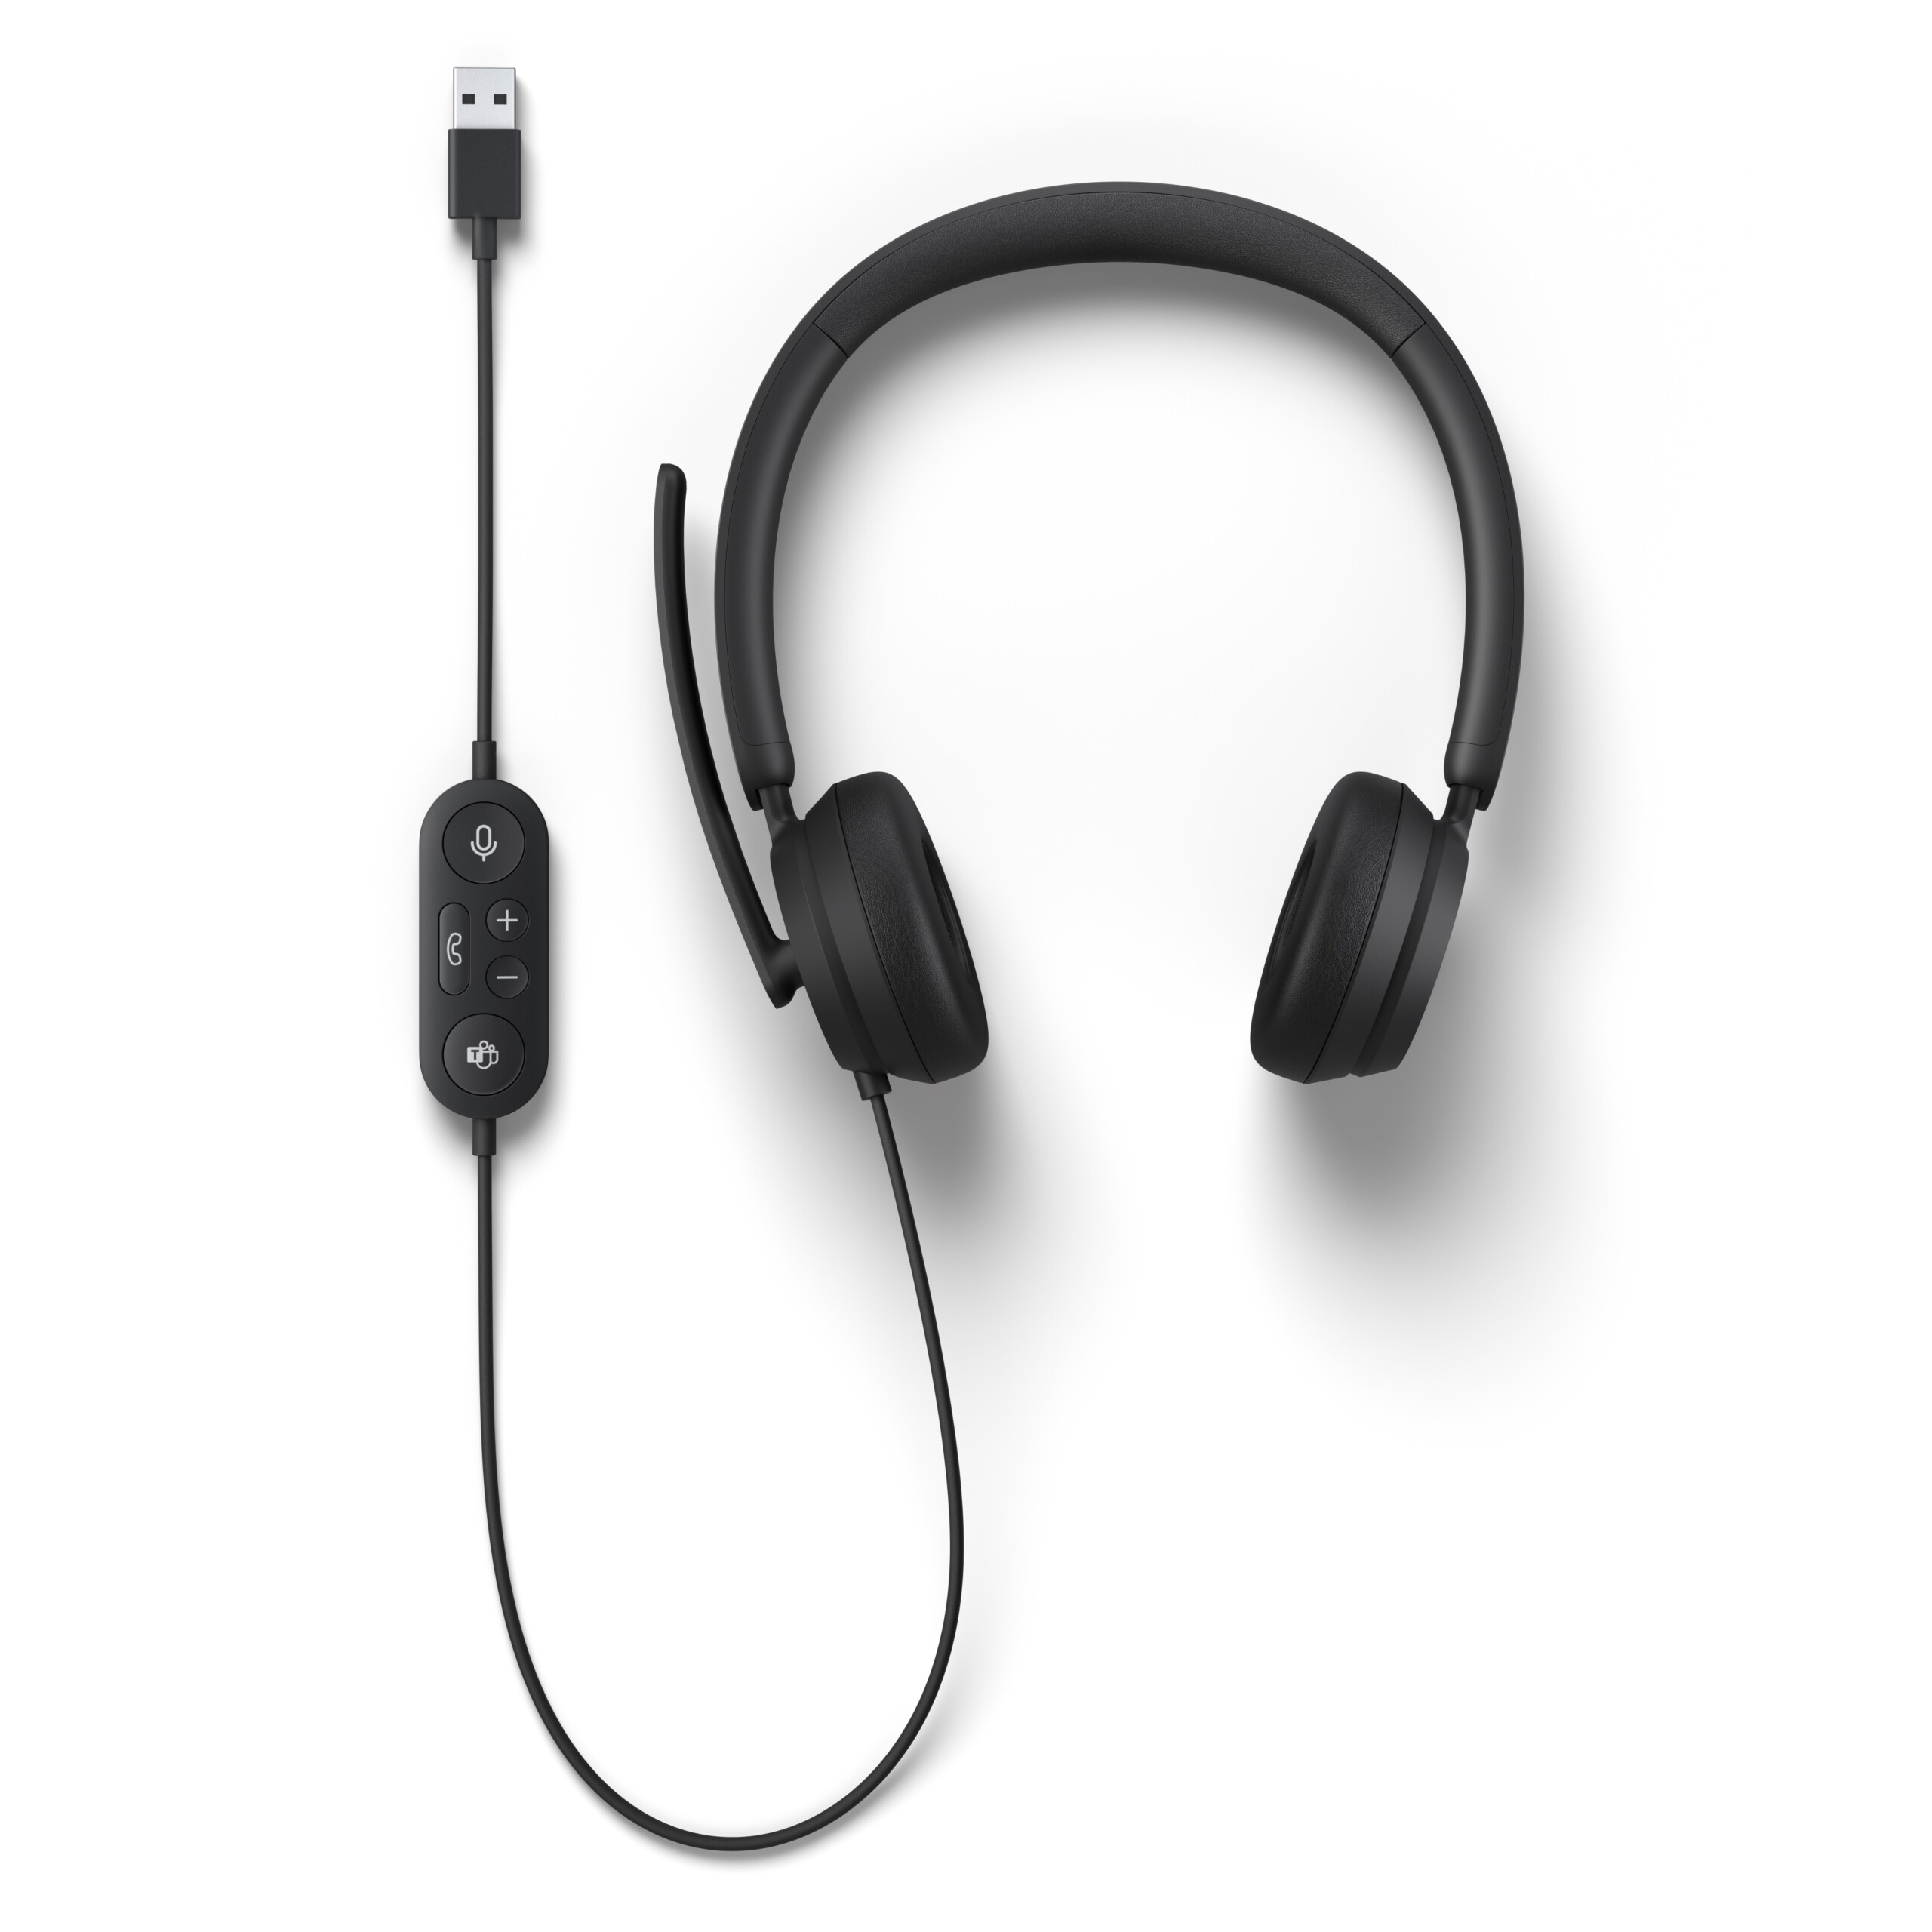 Le casque filaire Modern USB Headset // Source : Microsoft